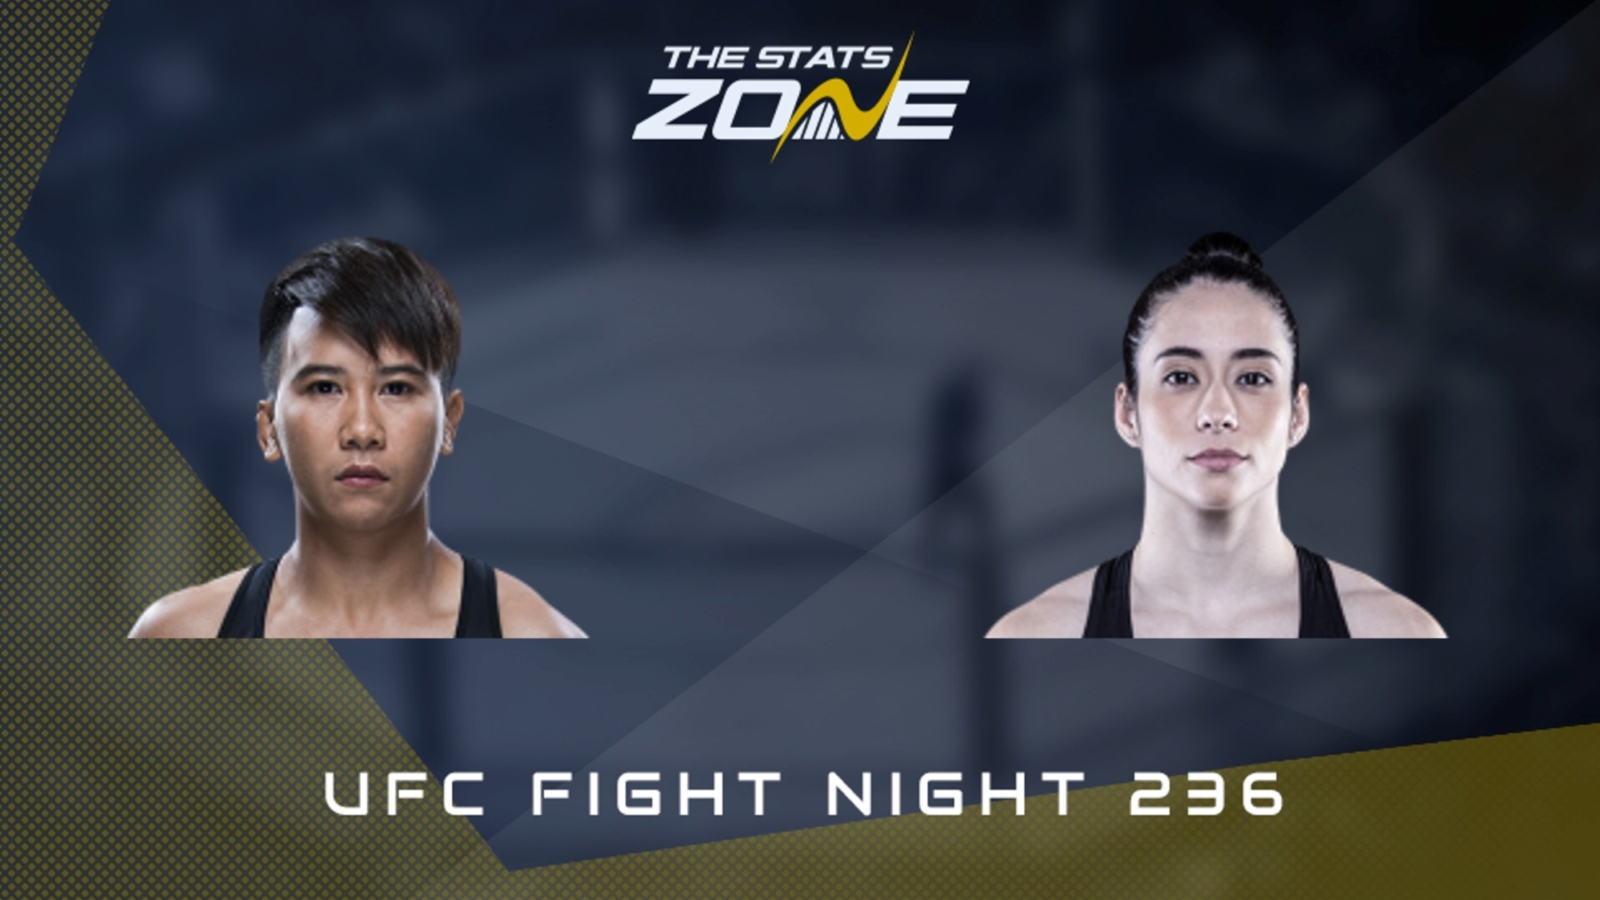 MMA Preview – Loma Lookboonmee vs Bruna Brasil at UFC Fight Night